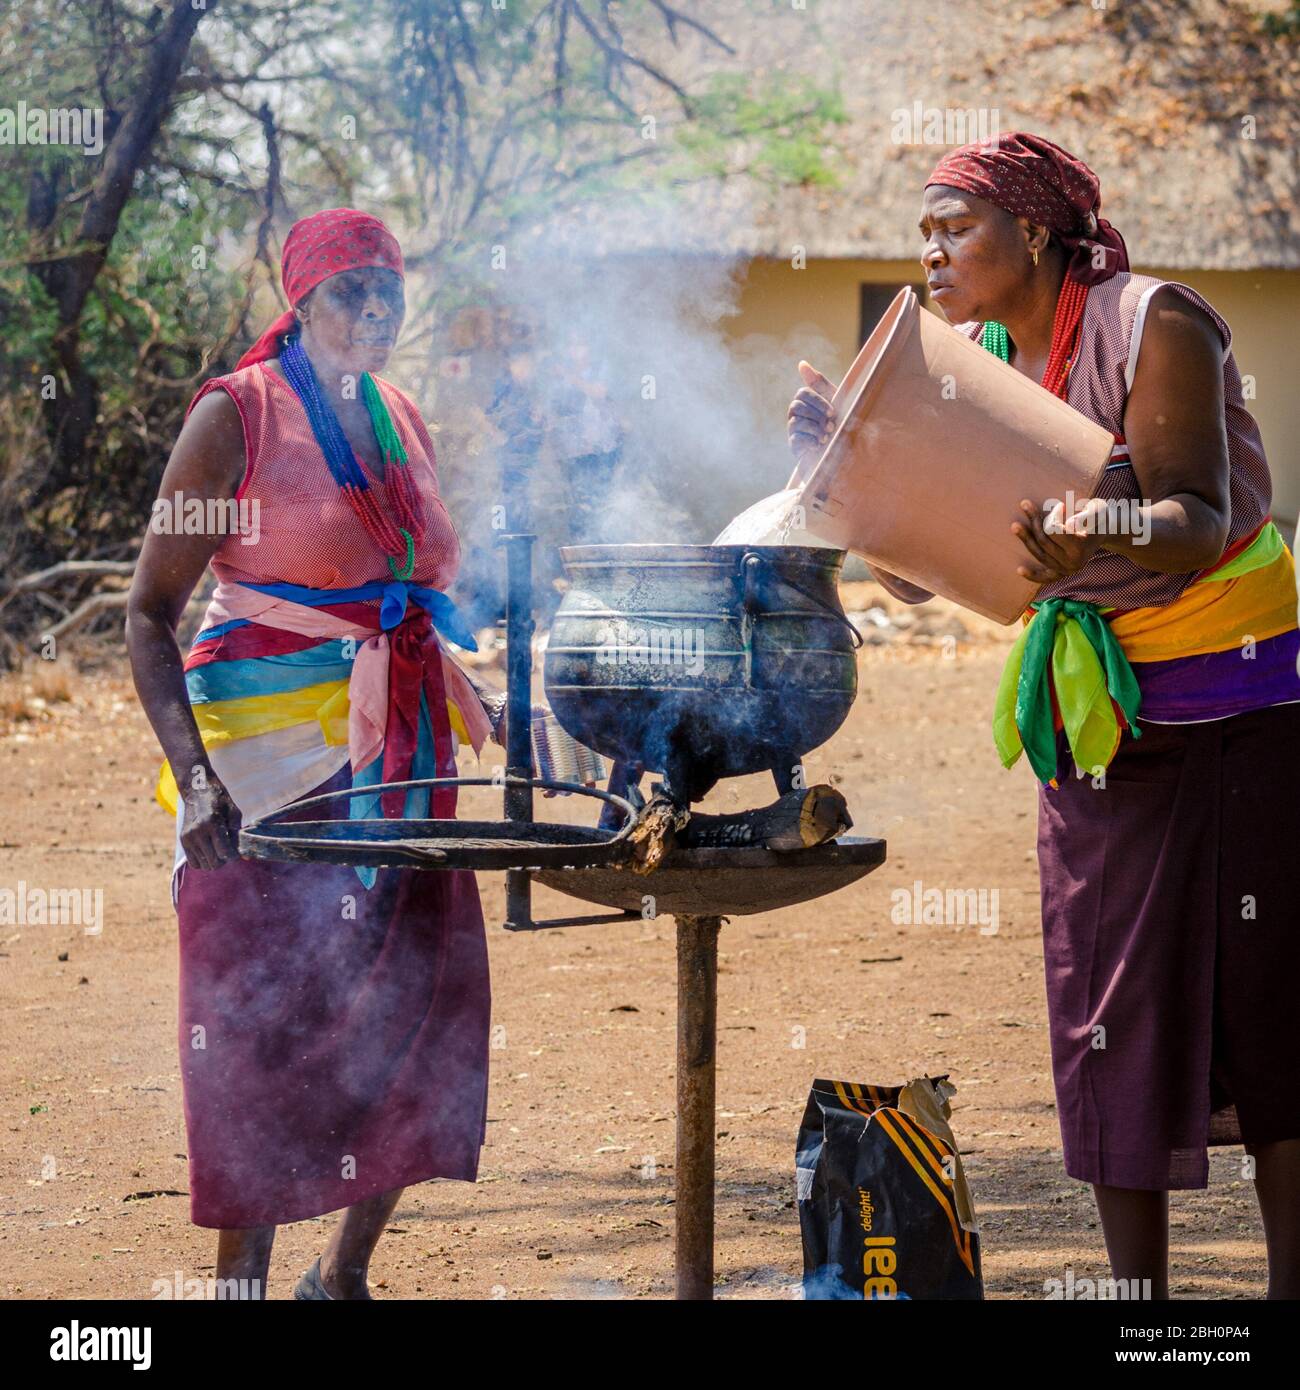 African ladies in traditional bright clothing dresses making a soup in a large cauldron over hot charcoal braai Kruger Safari Park South Africa Stock Photo